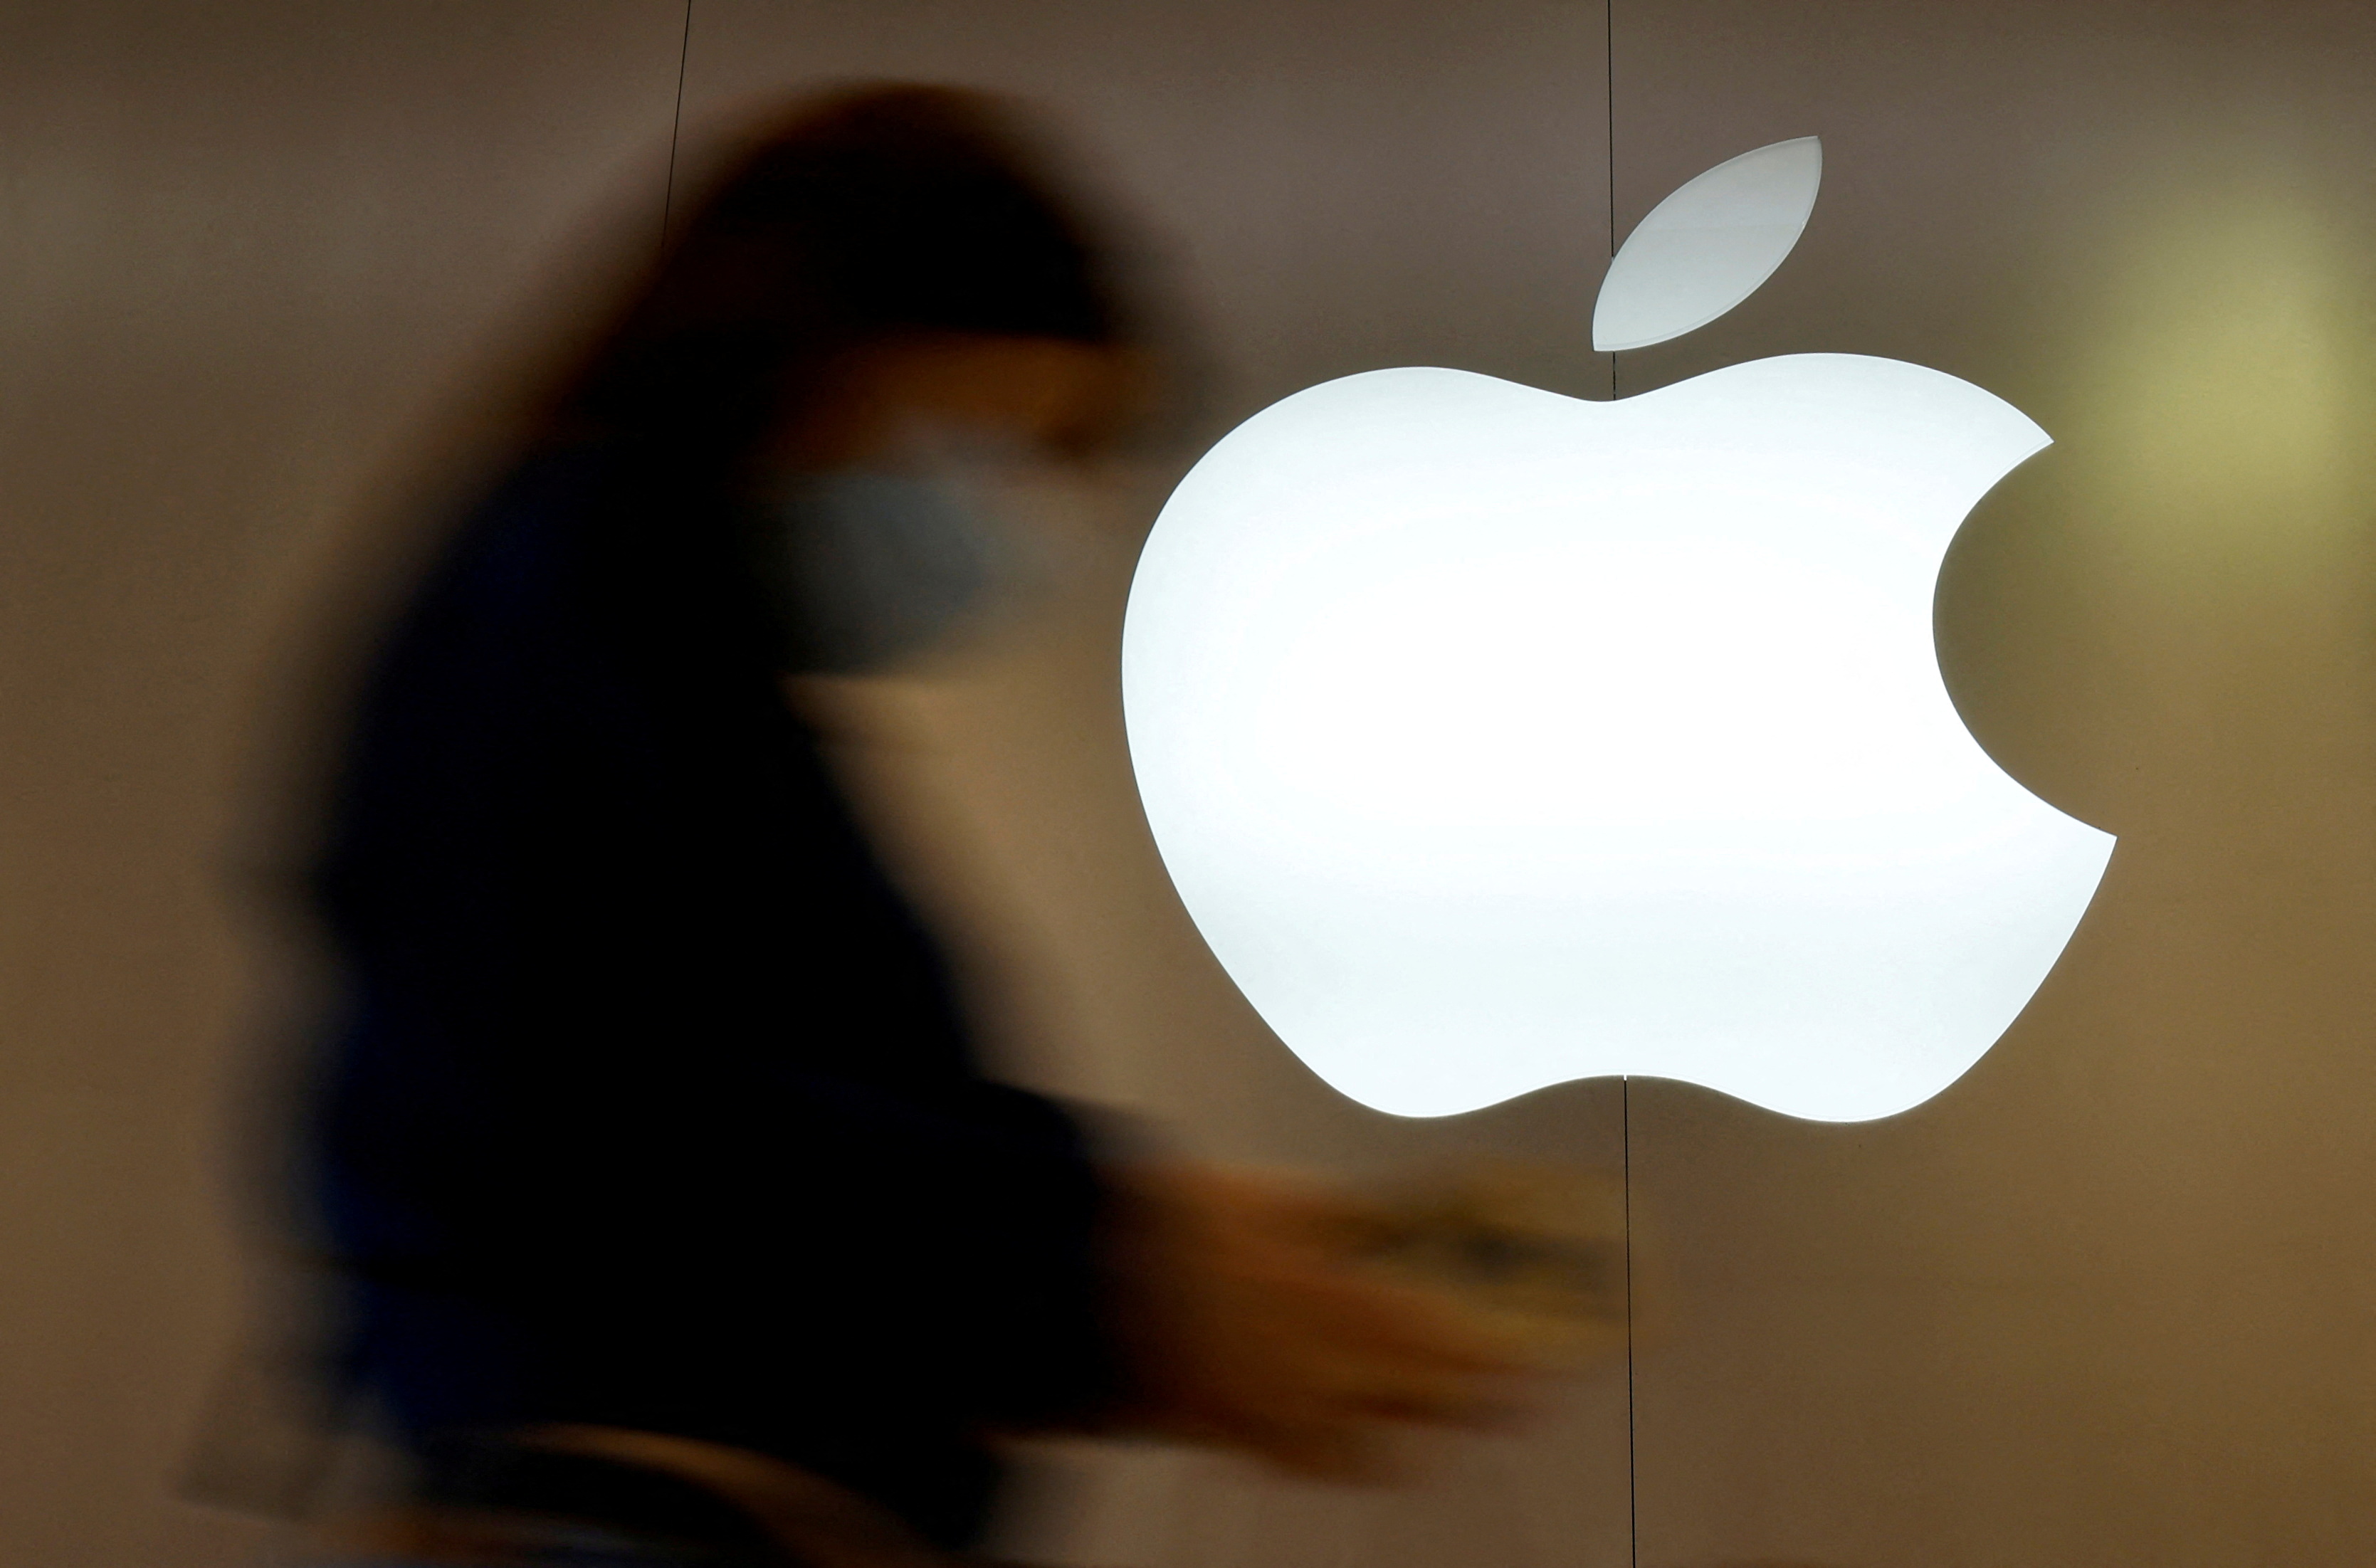 A woman walks past an Apple logo in front of an Apple store in Saint-Herblain near Nantes, France, on September 16, 2021. REUTERS / Stephane Mahe